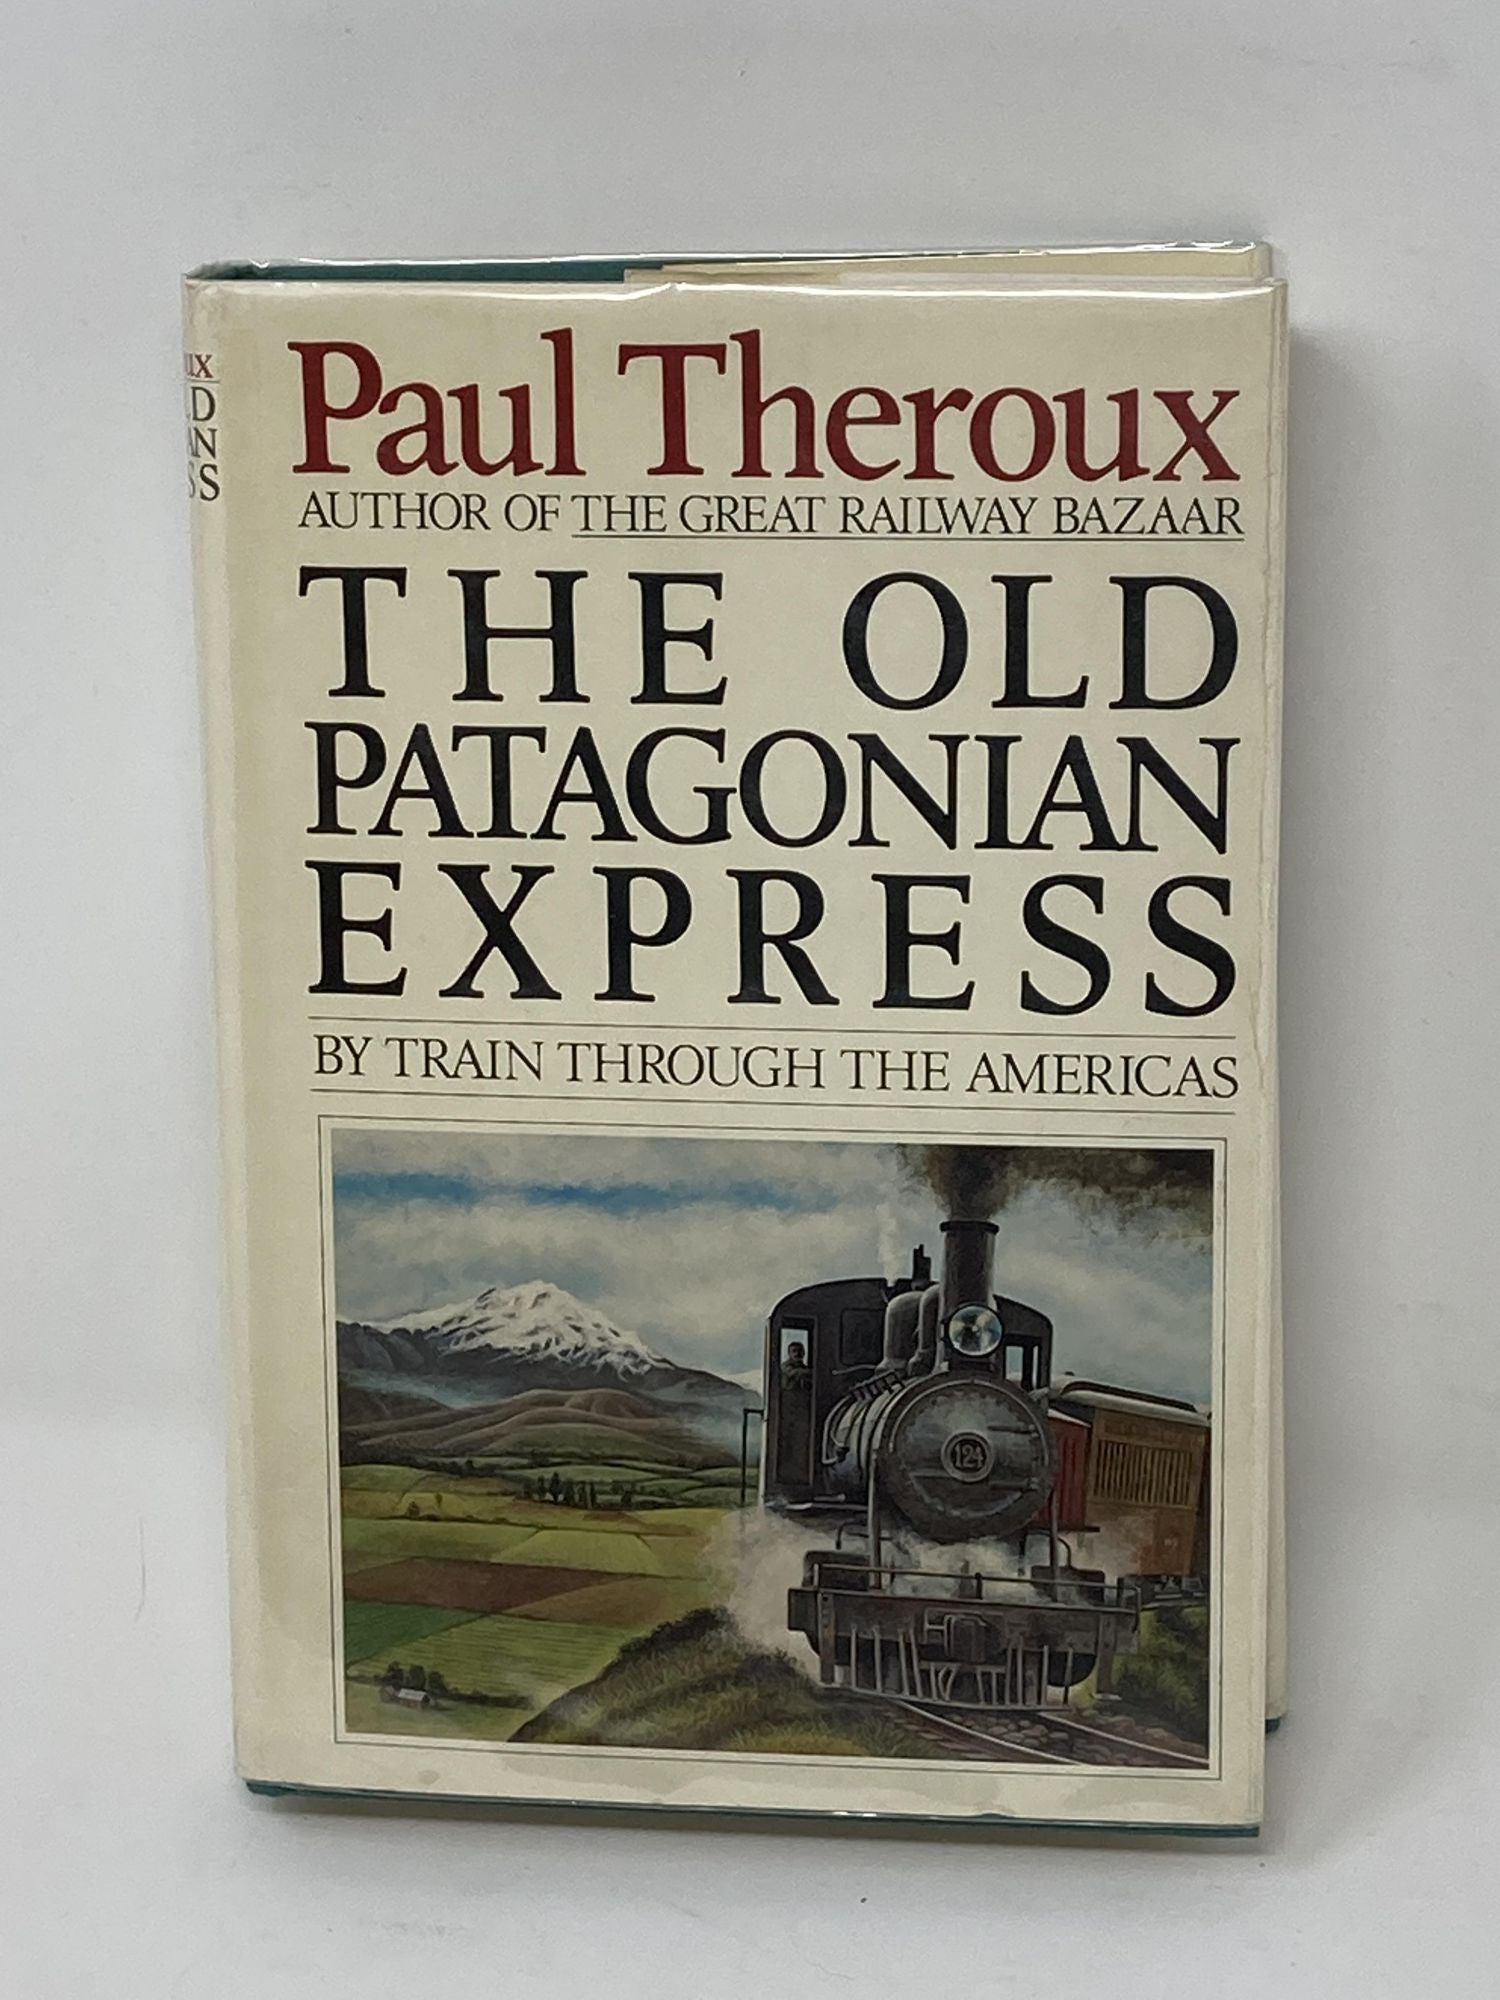 Theroux, Paul - The Old Patagonian Express, by Train Through the Americas (Signed)